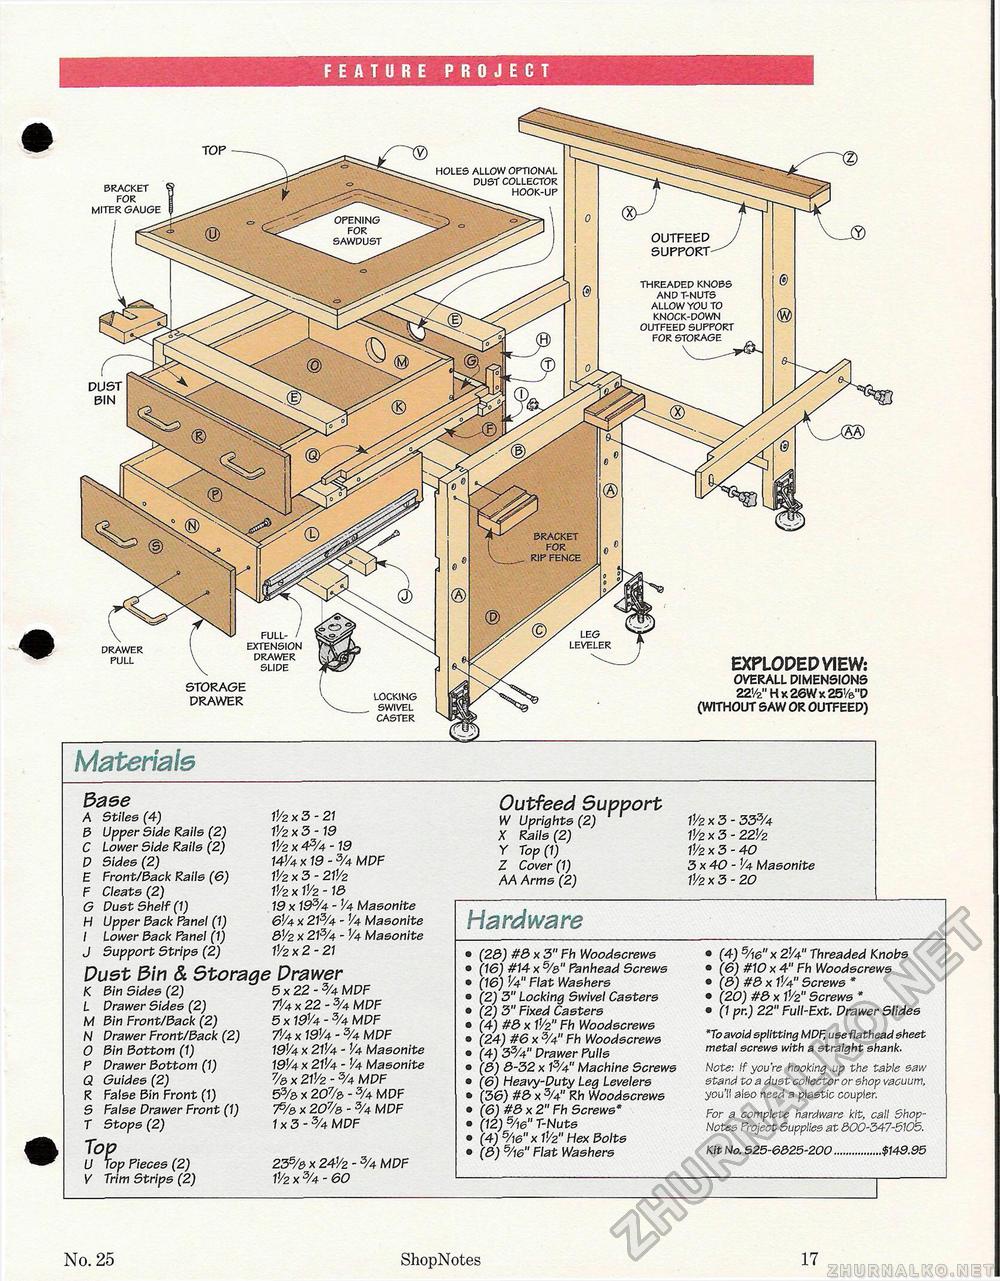 25 - Special Table Saw Issue,  17